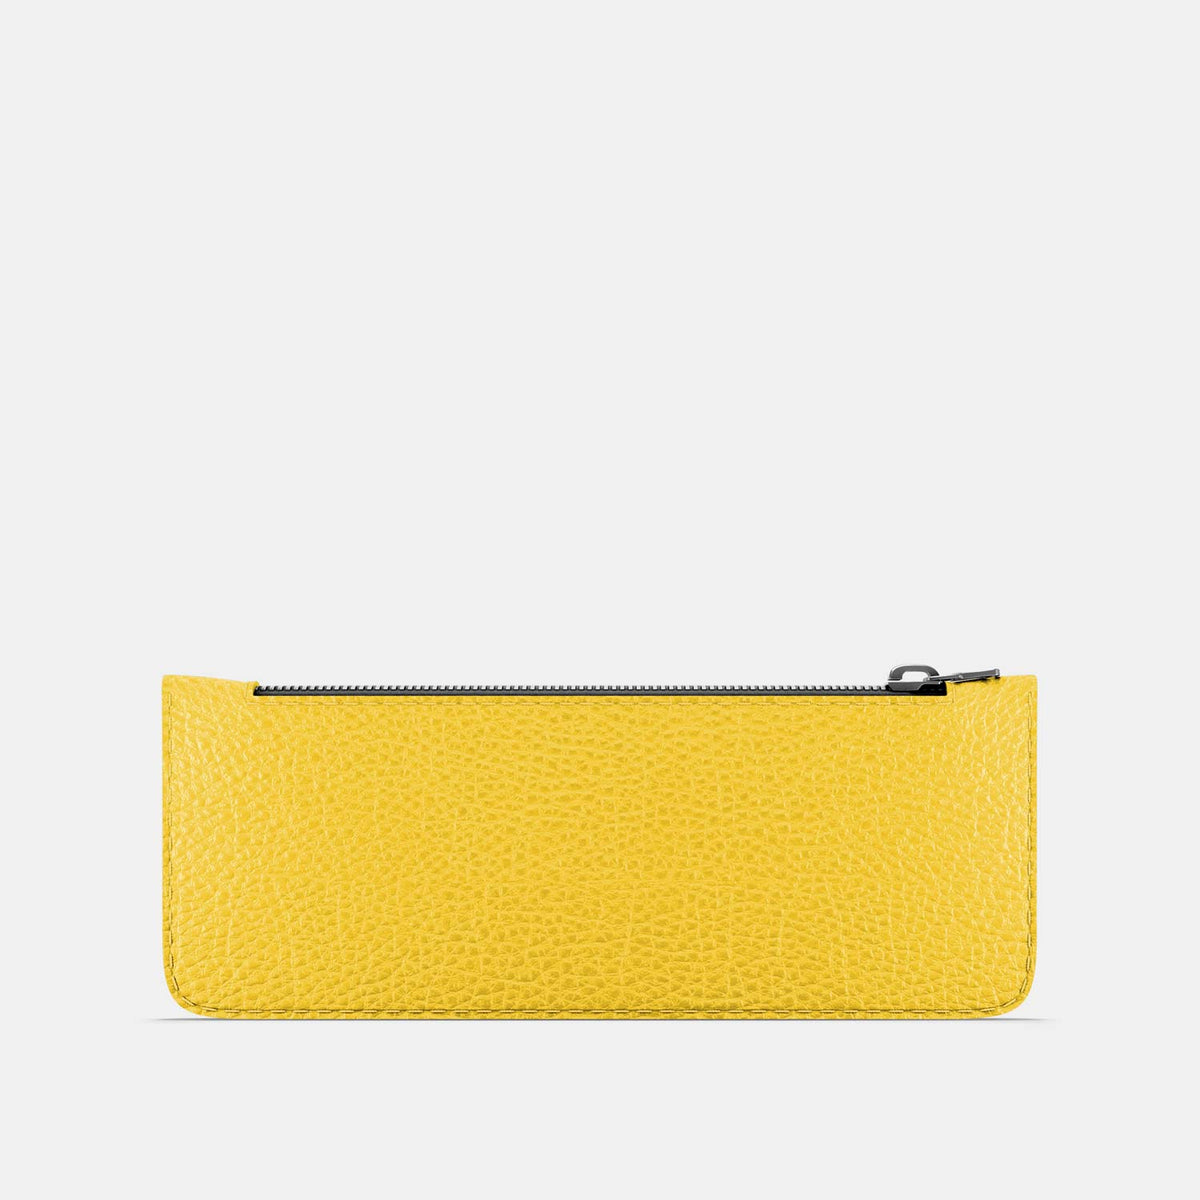 Leather Pencil Case - Yellow and Grey